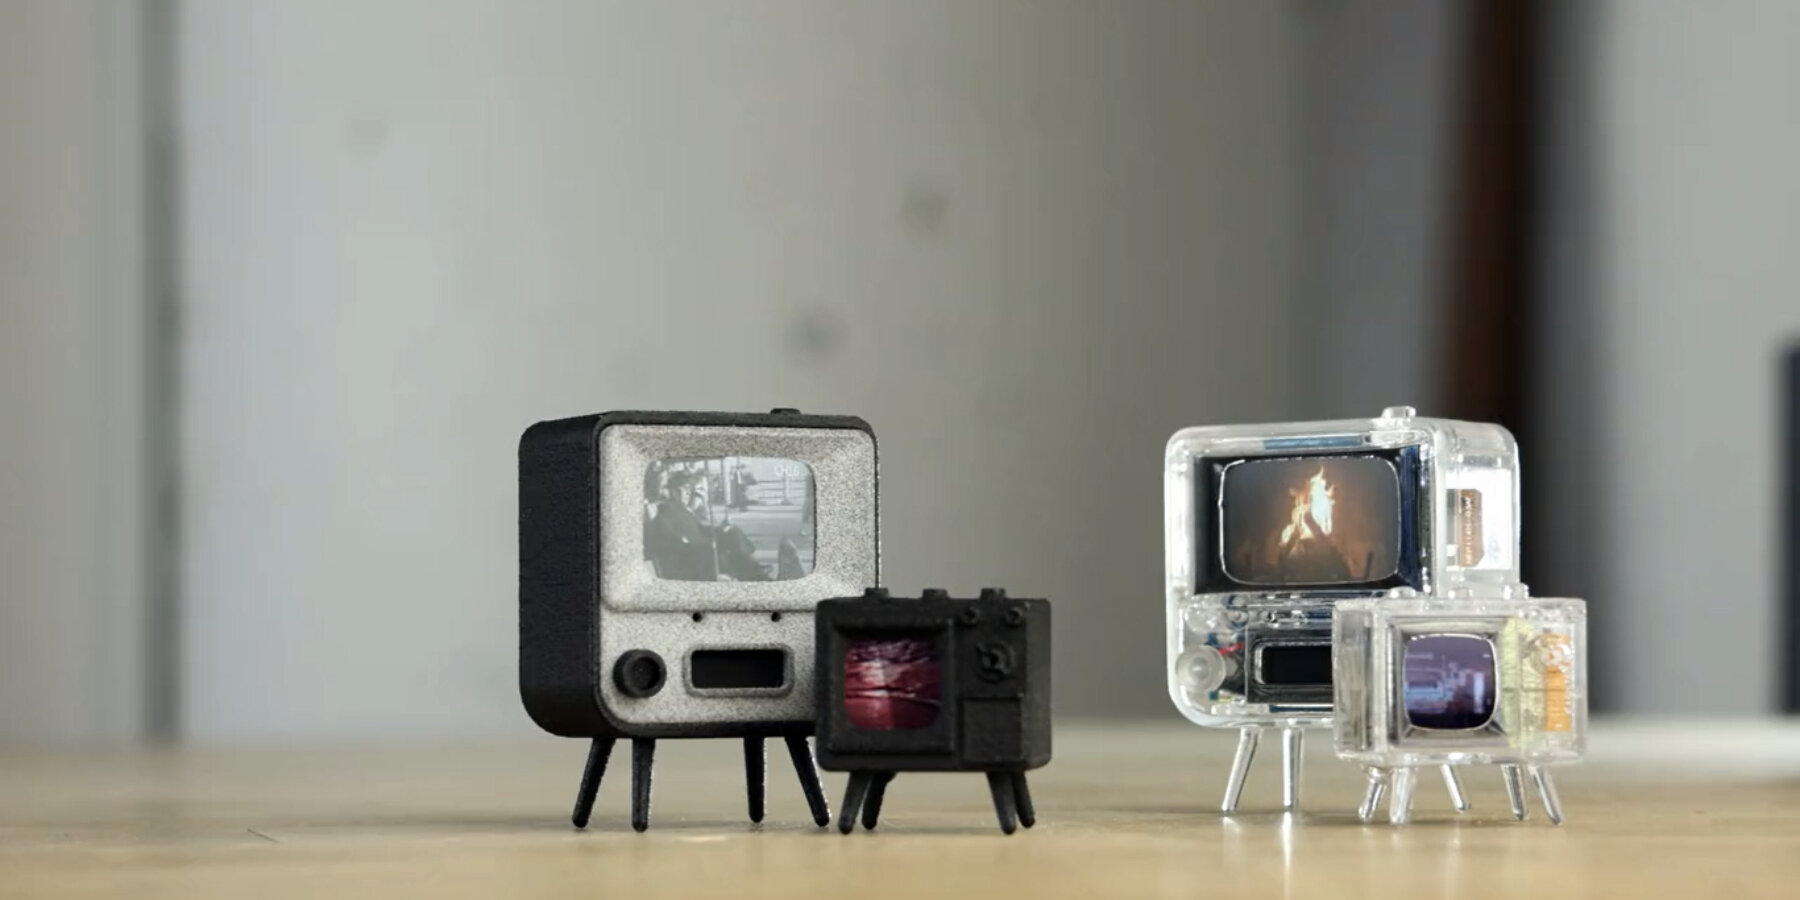 functional miniature TVs get even smaller for fun-sized movie